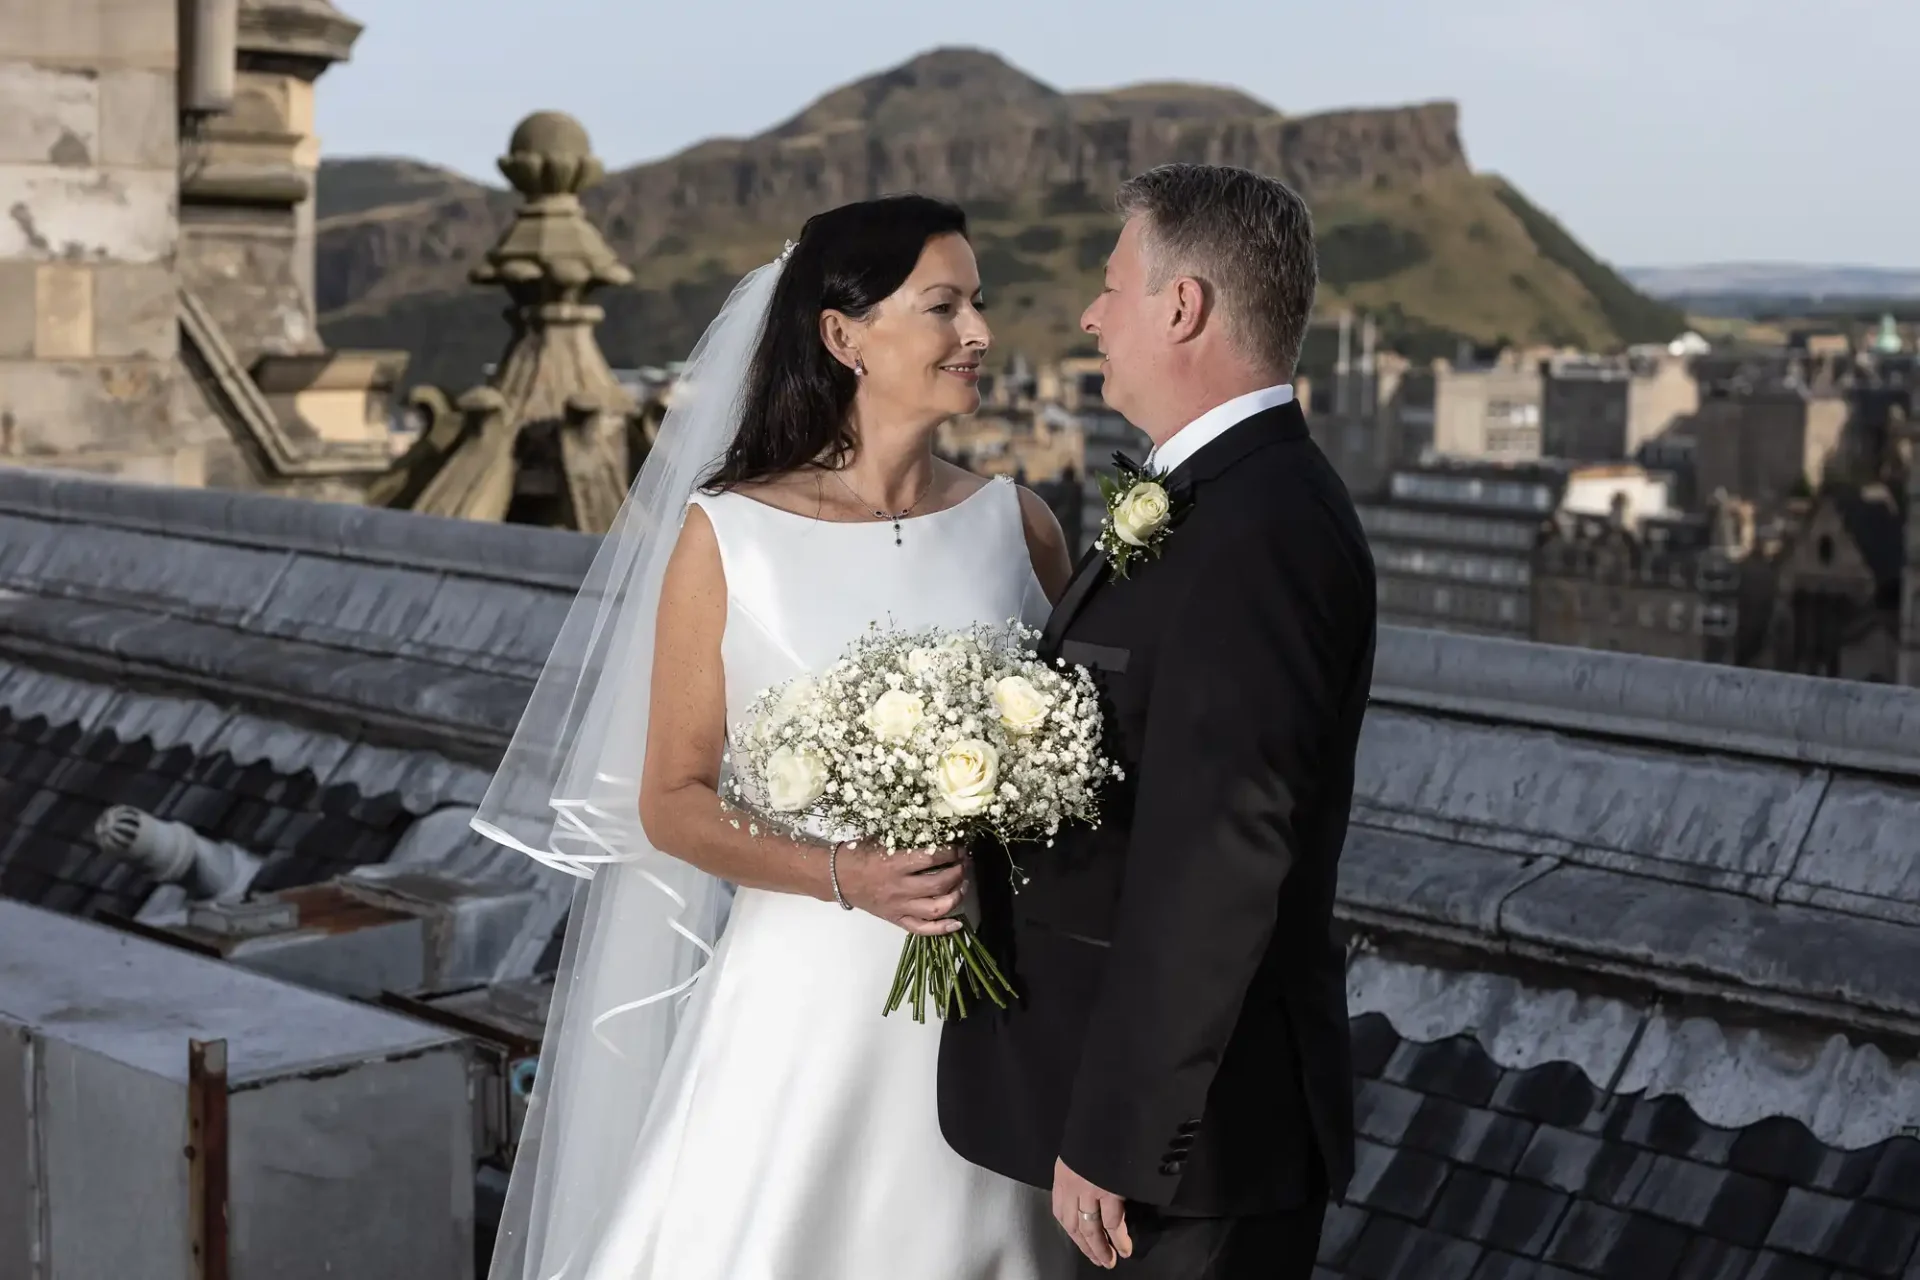 A bride and groom holding hands and smiling at each other on a rooftop with a cityscape and hills in the background.